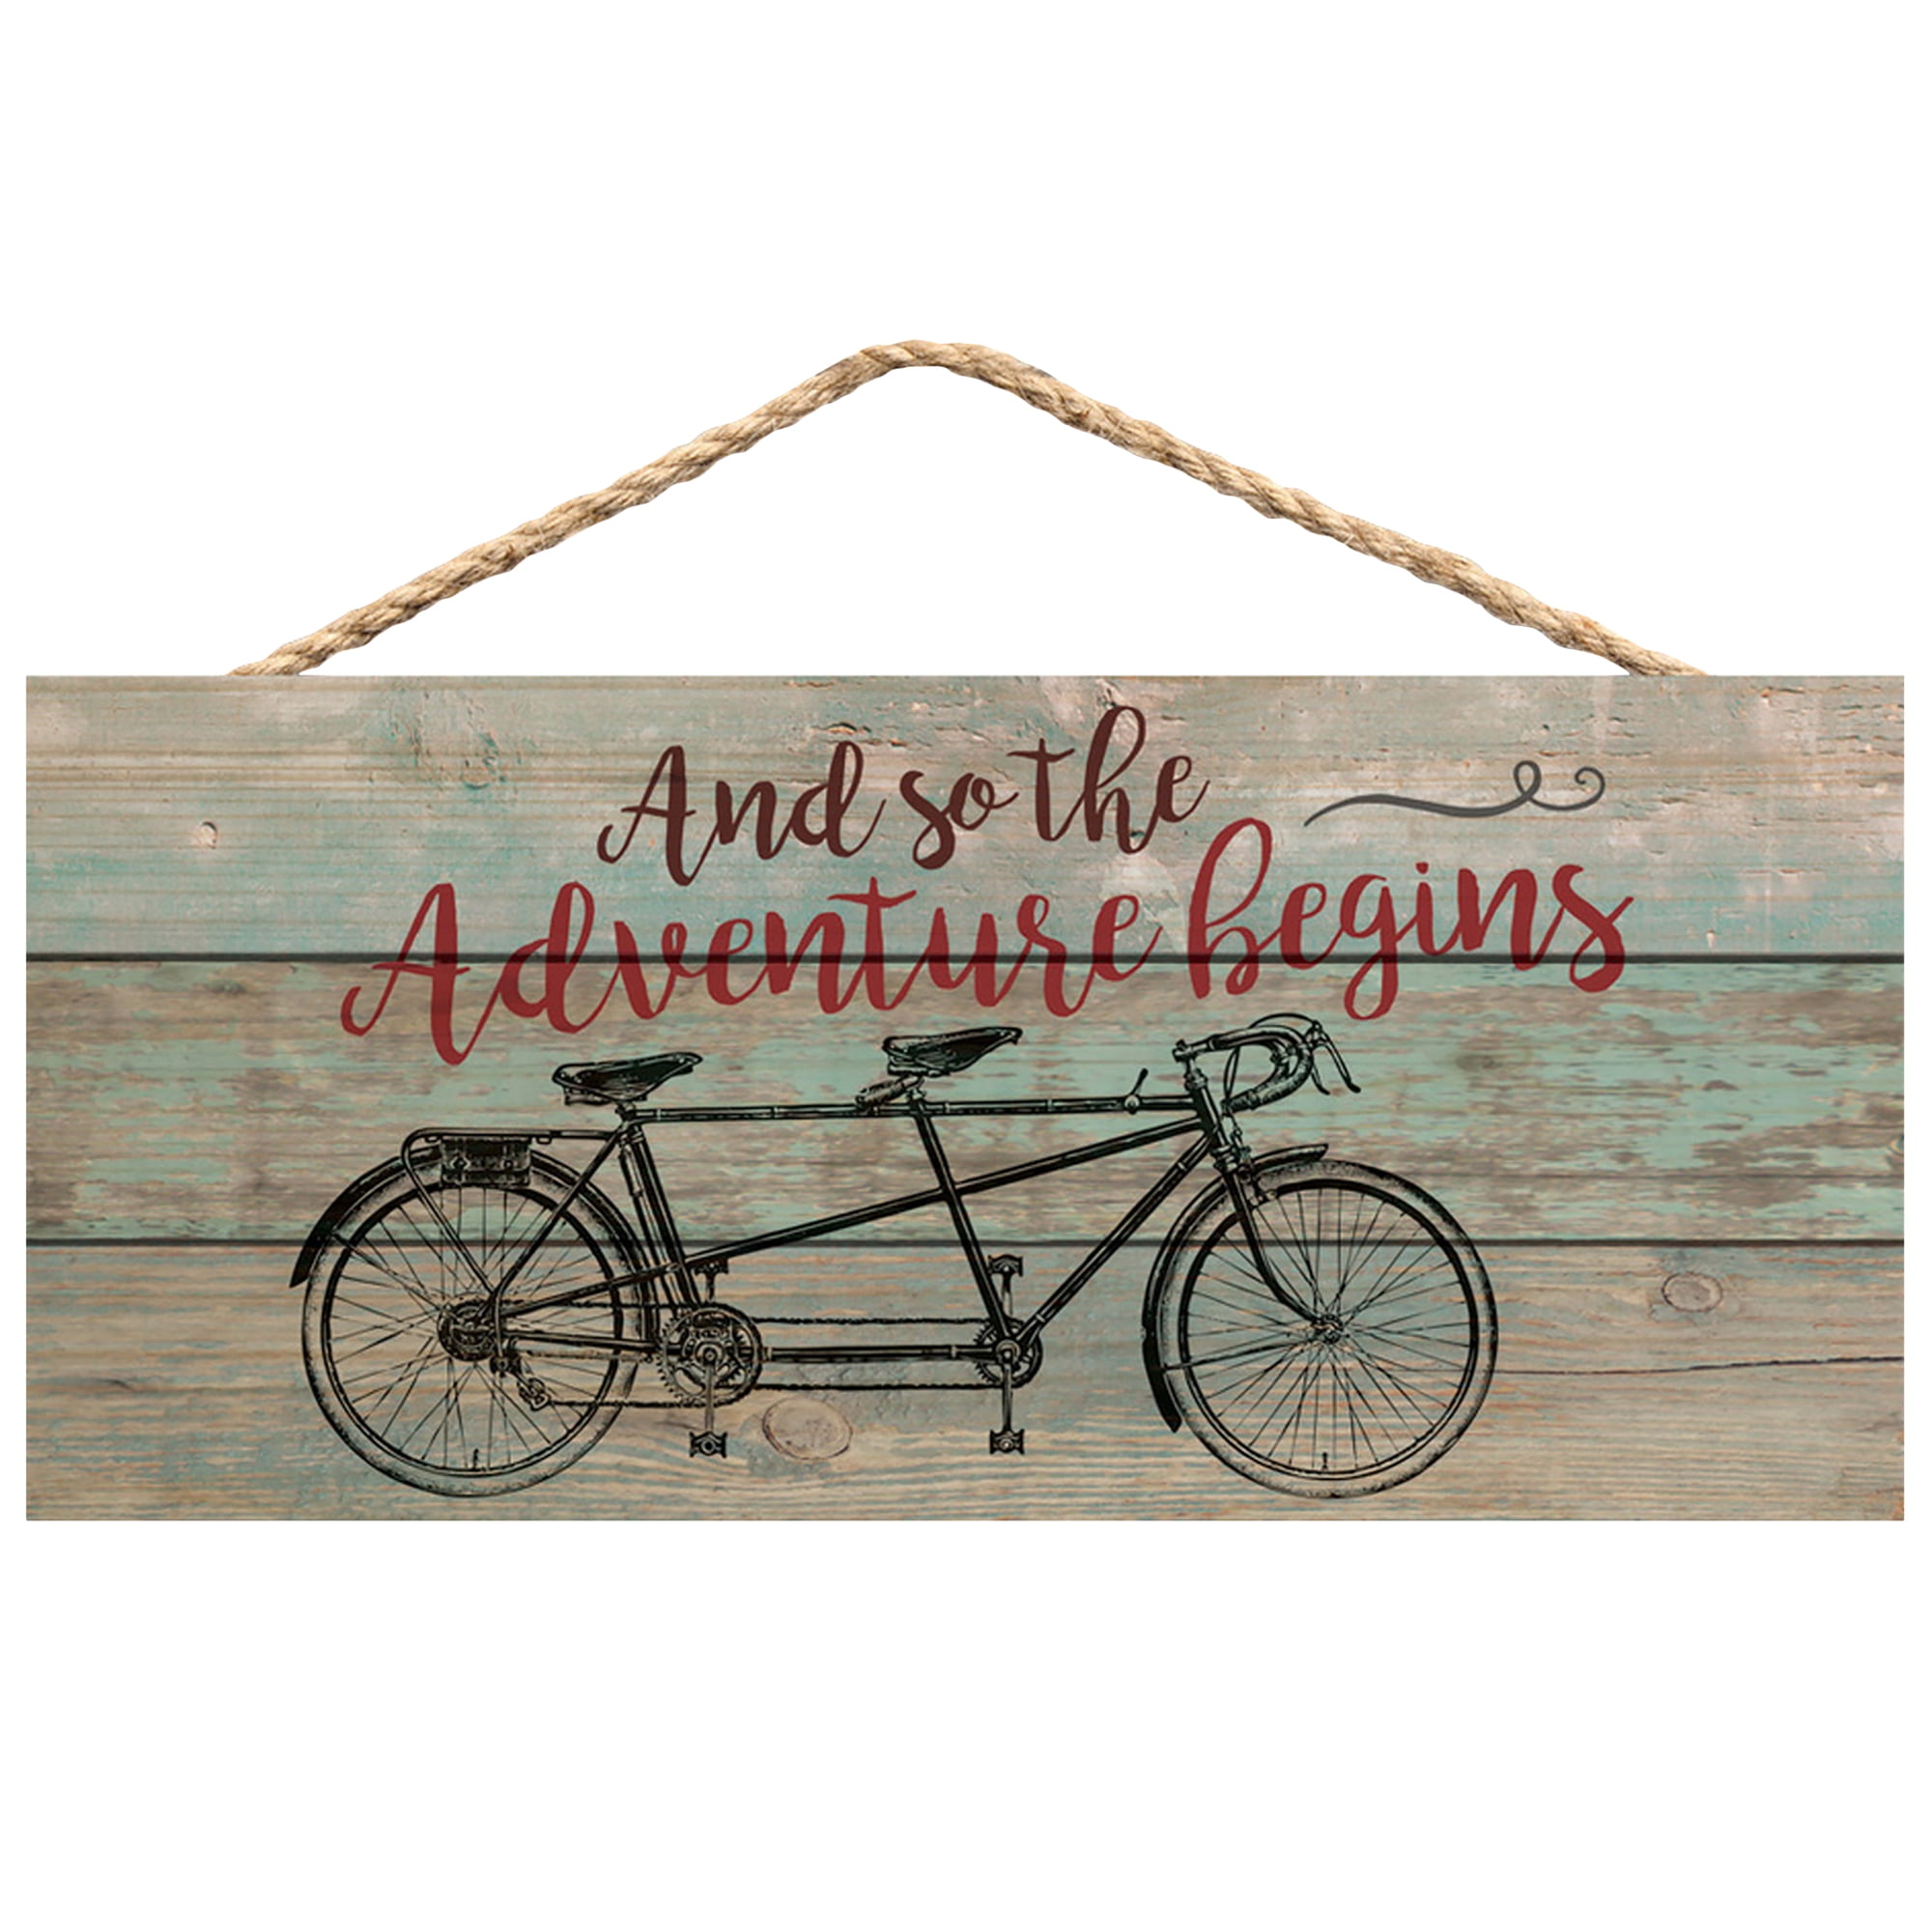 Graham Dunn Adventure Begins Tandem Bicycle Distressed 10 x 4.5 Wood Wall Hanging Plaque Sign P